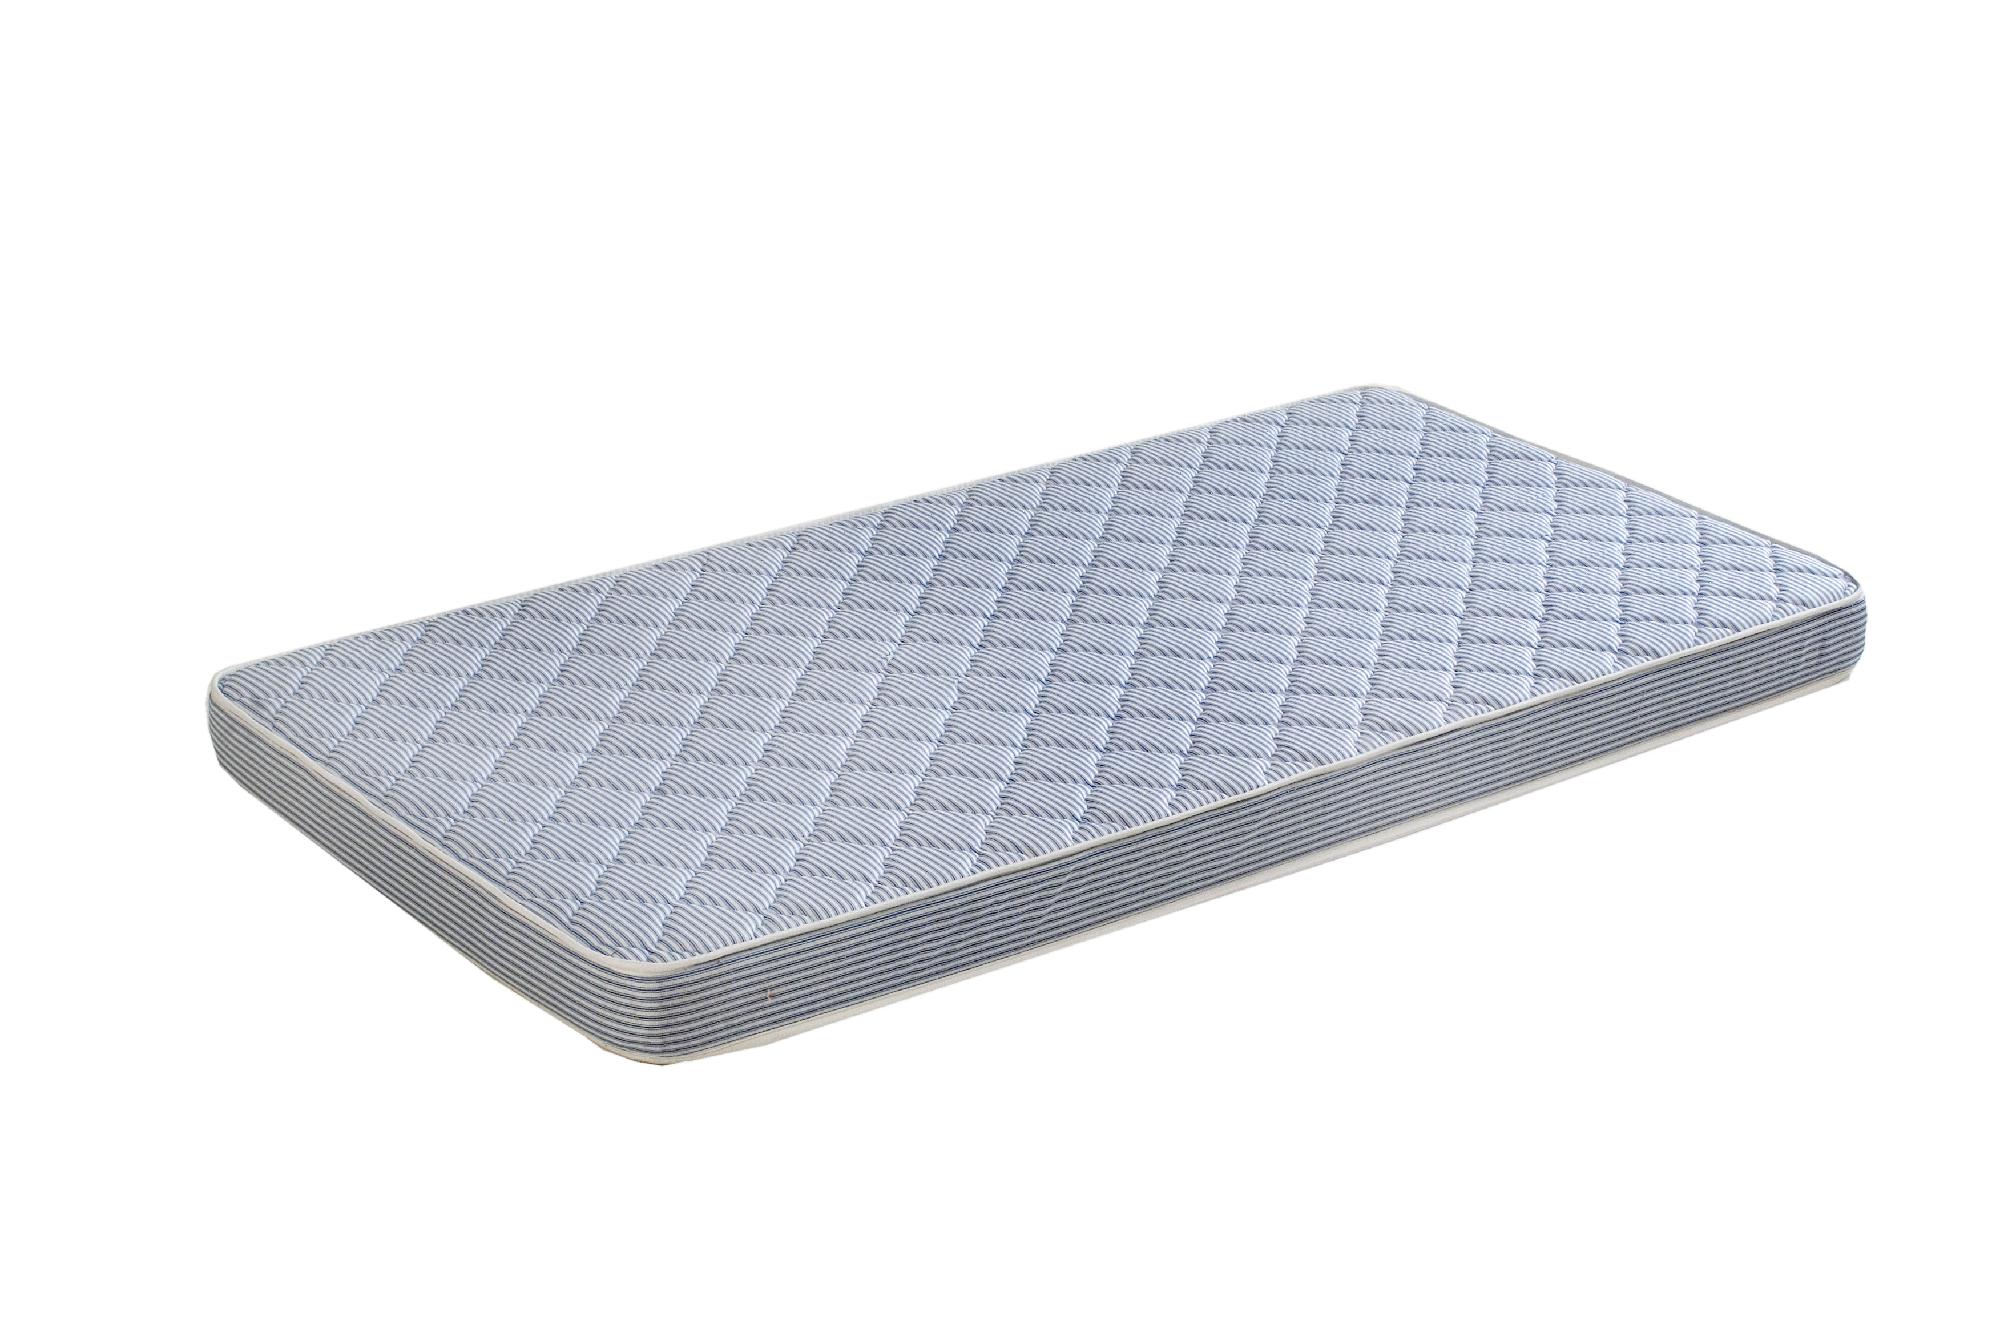 Innerspace Luxury Products 5.5-inch Truck Relax Mattress Only - Quilted One Side - Full